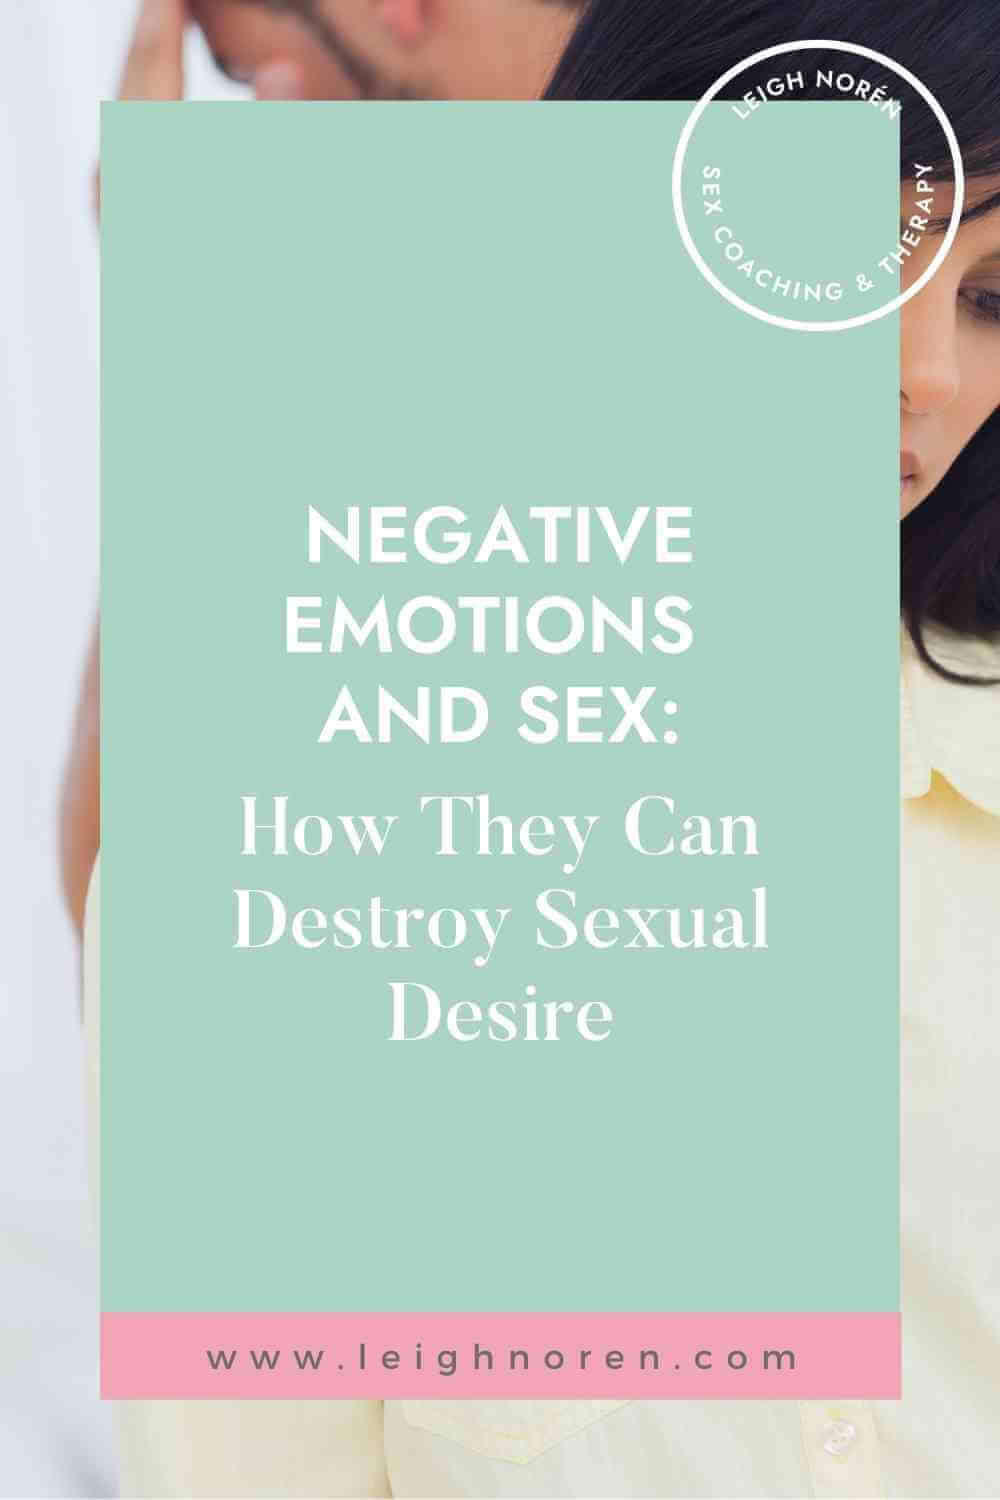 Negative Emotions And Sex: How They Can Destroy Sexual Desire